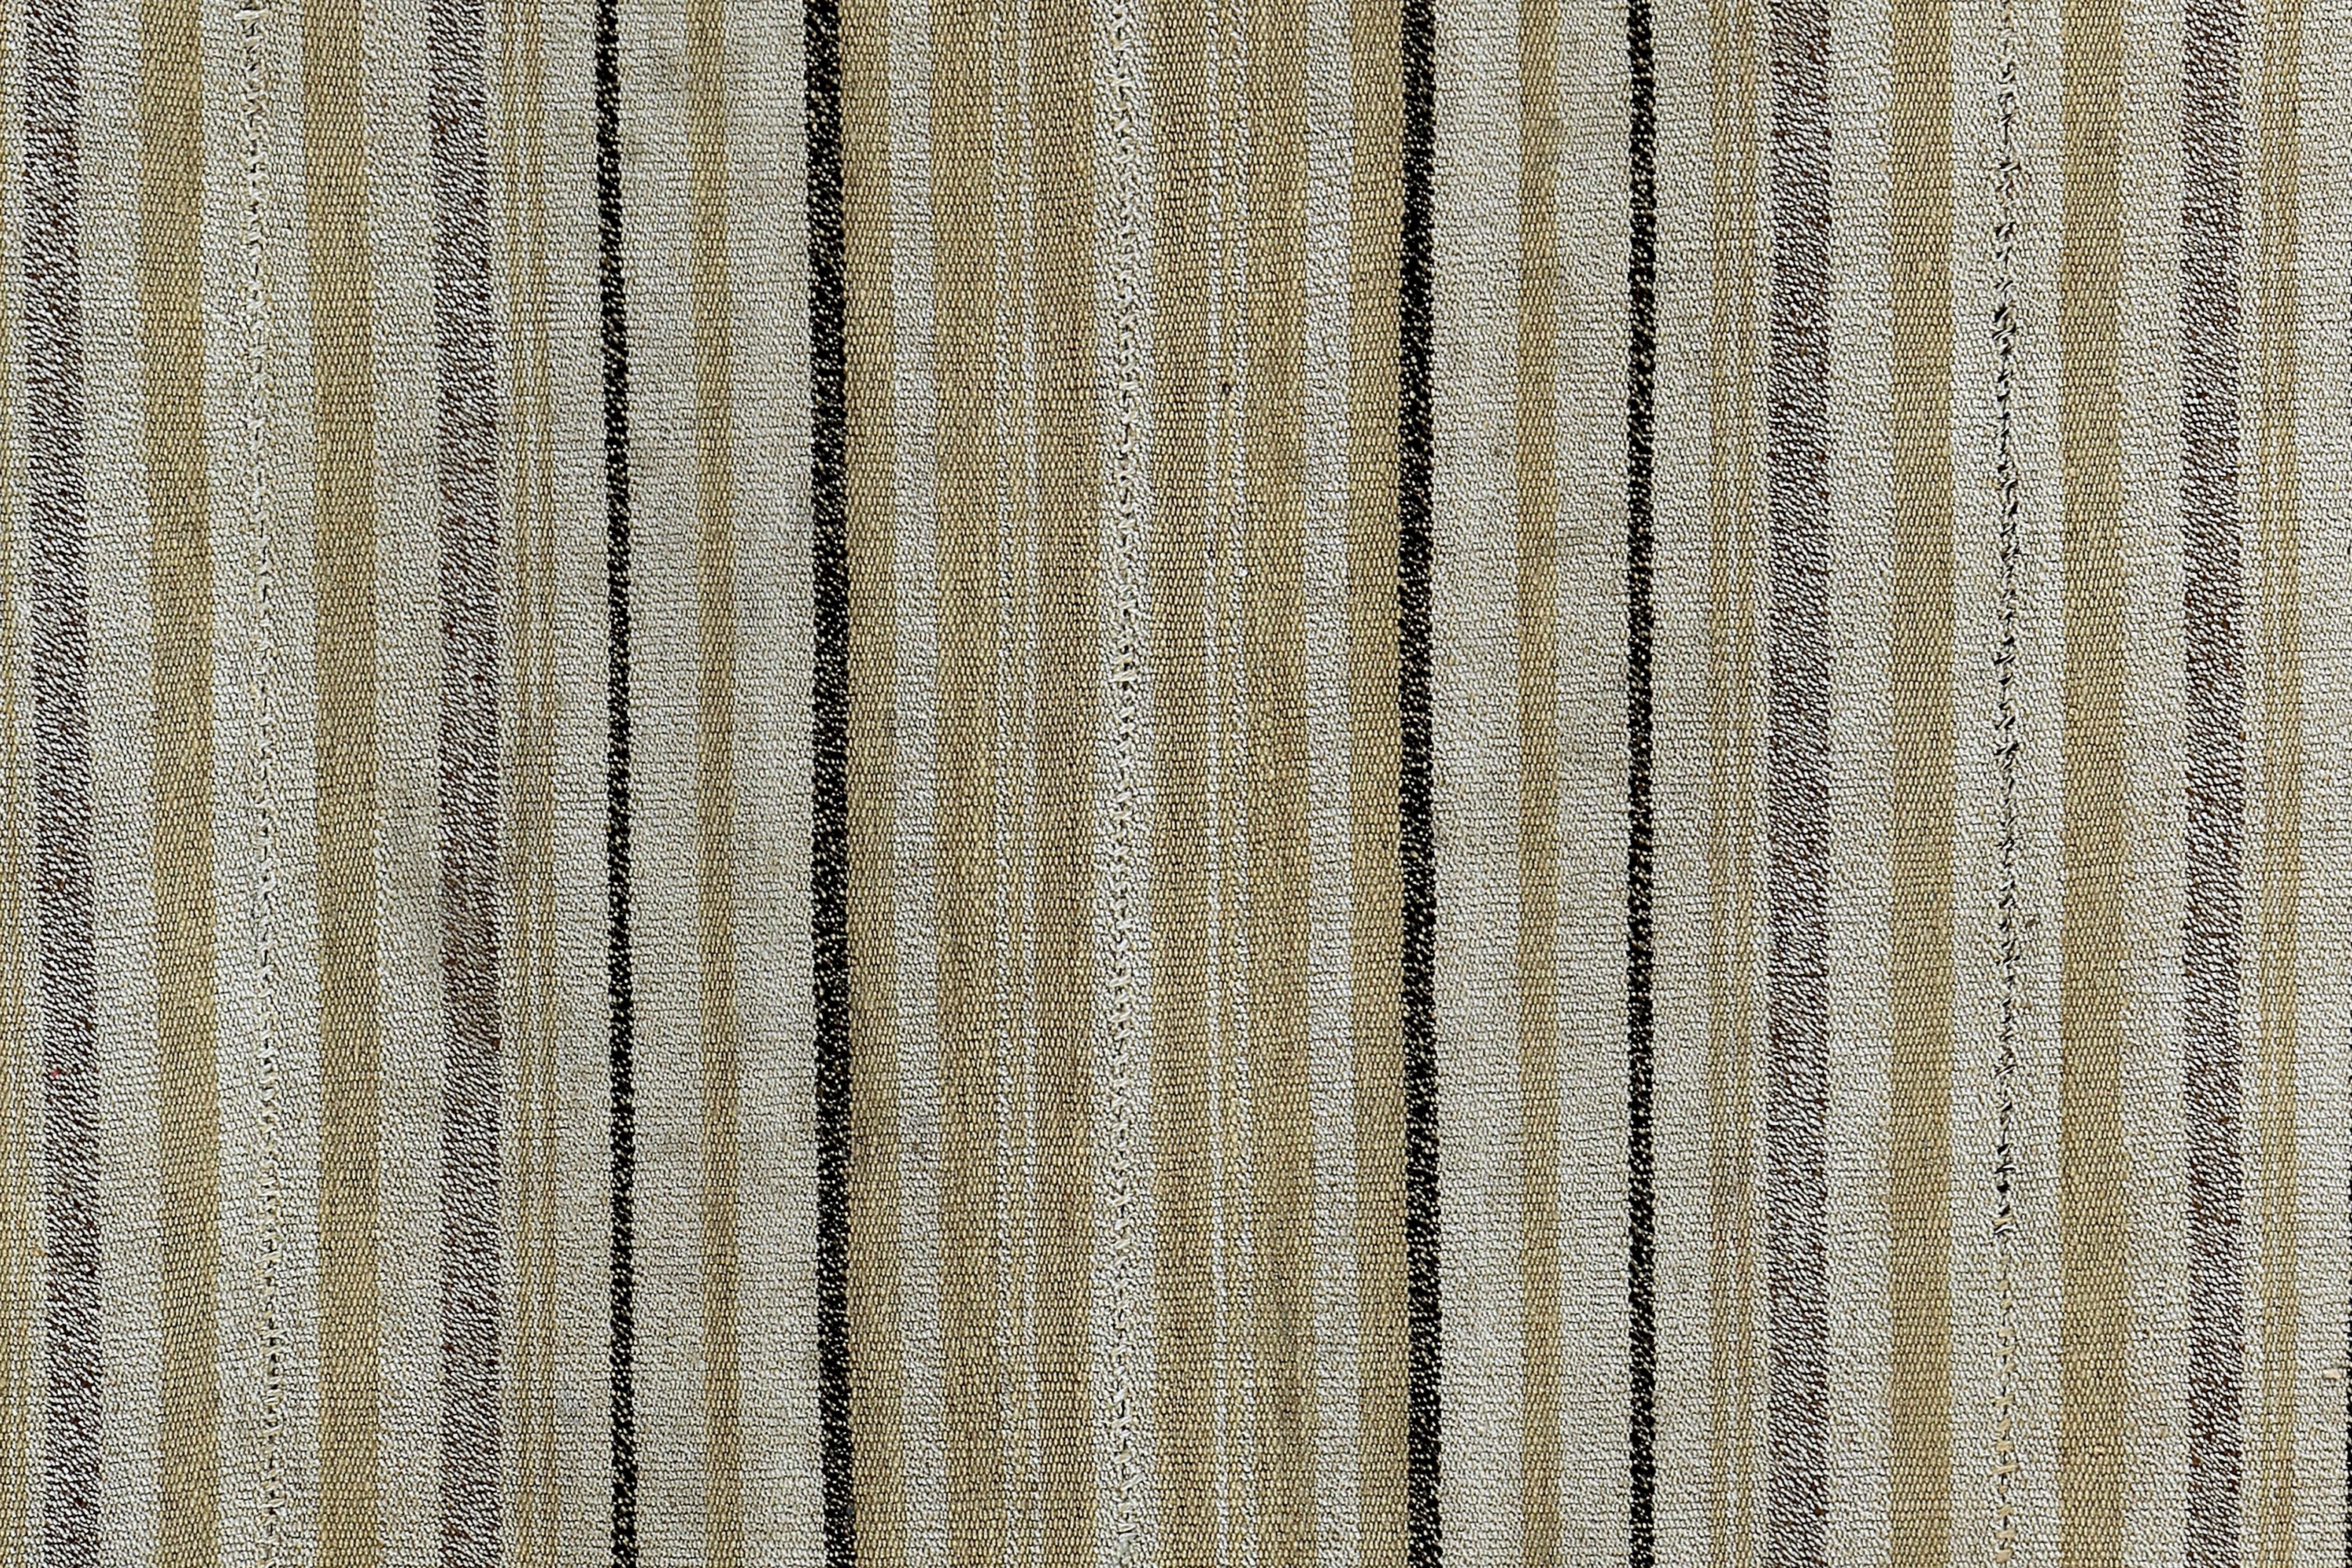 Turkish Kilim Runner Rug with Black & Ivory Stripes on Beige Field In New Condition For Sale In Dallas, TX